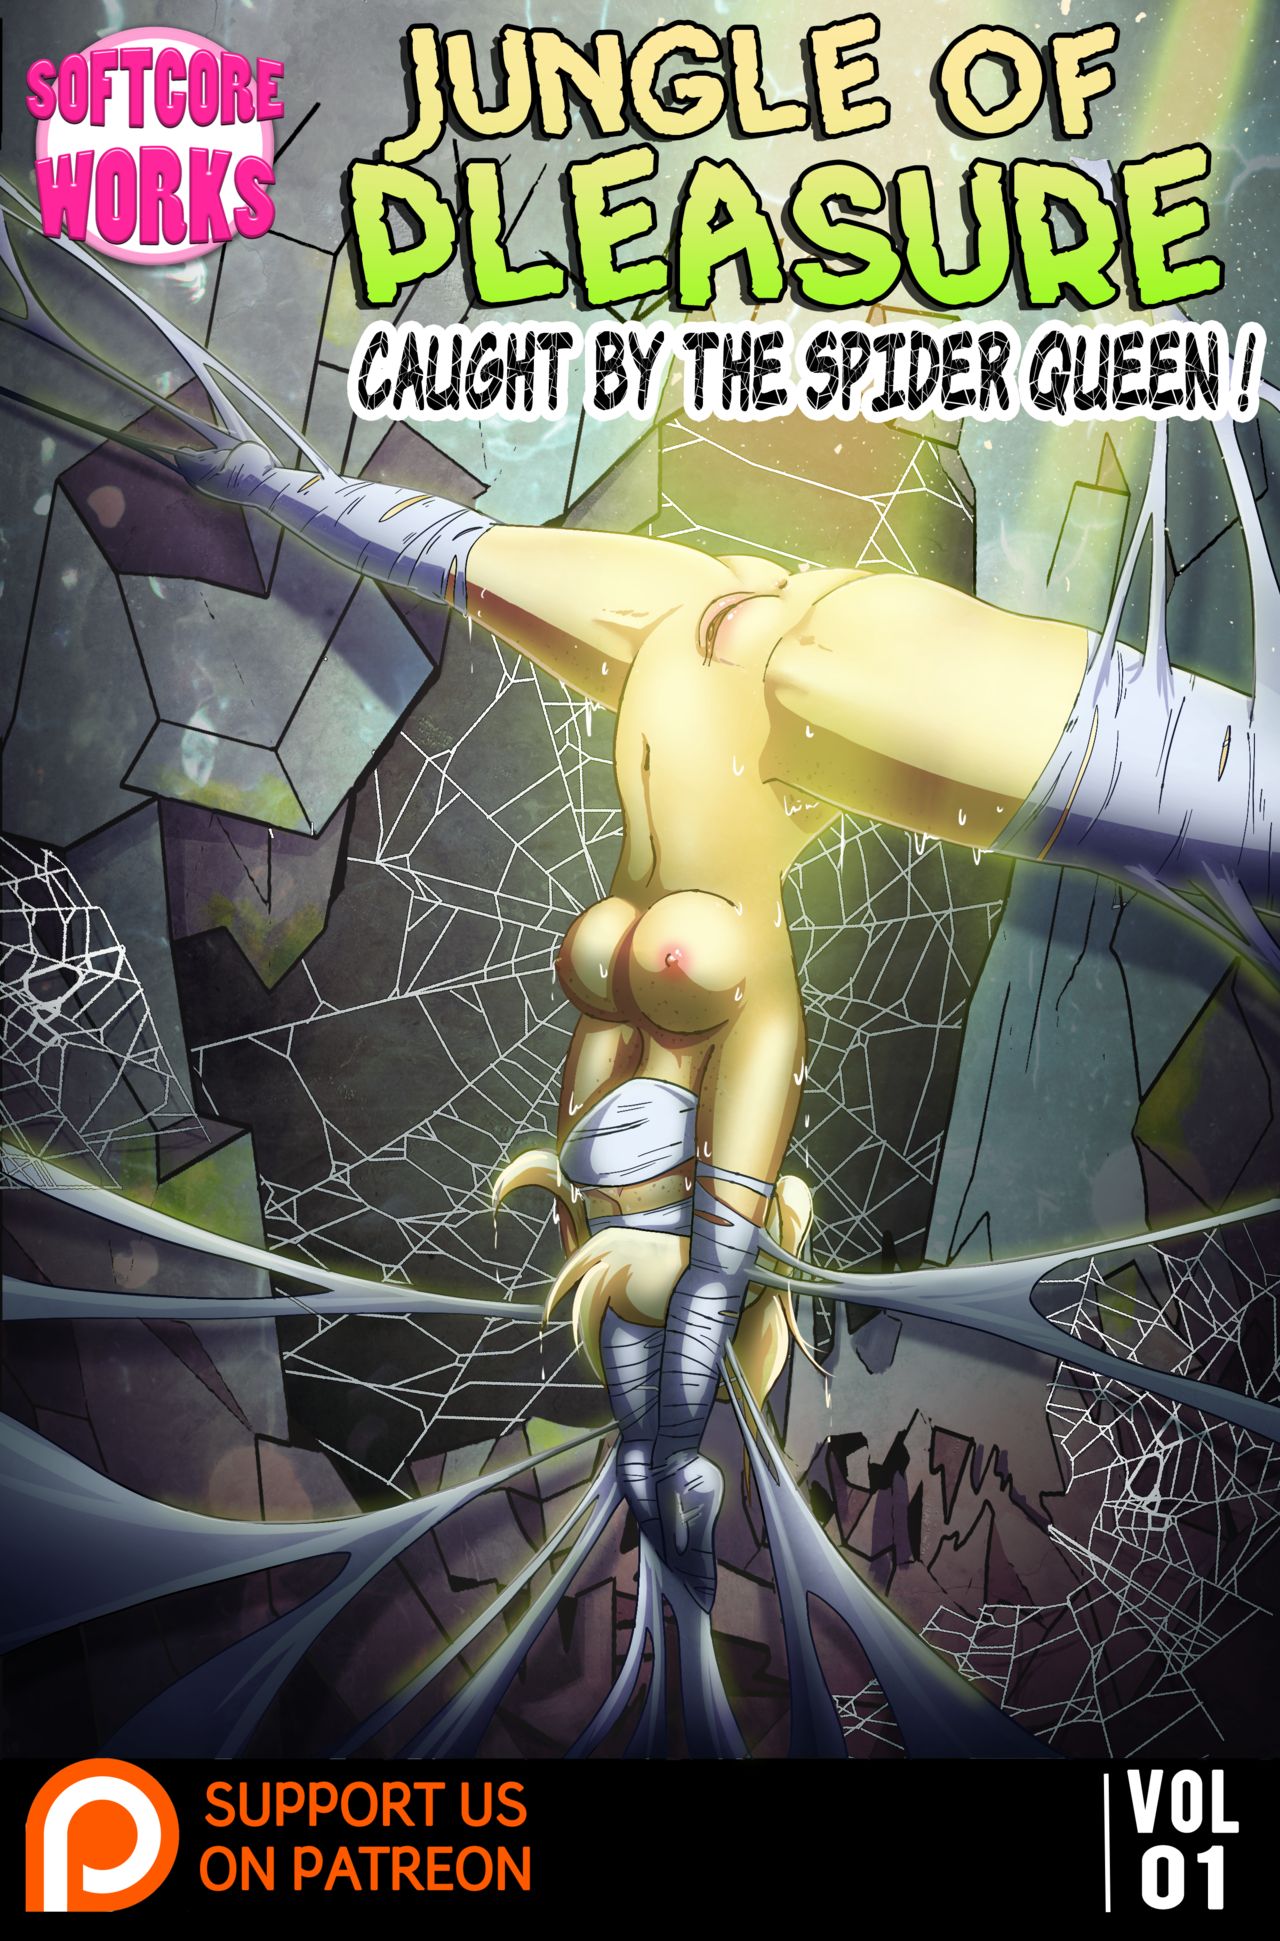 Jungle of Pleasure Volume 1 - Caught by the Spider Queen by Softcore Works